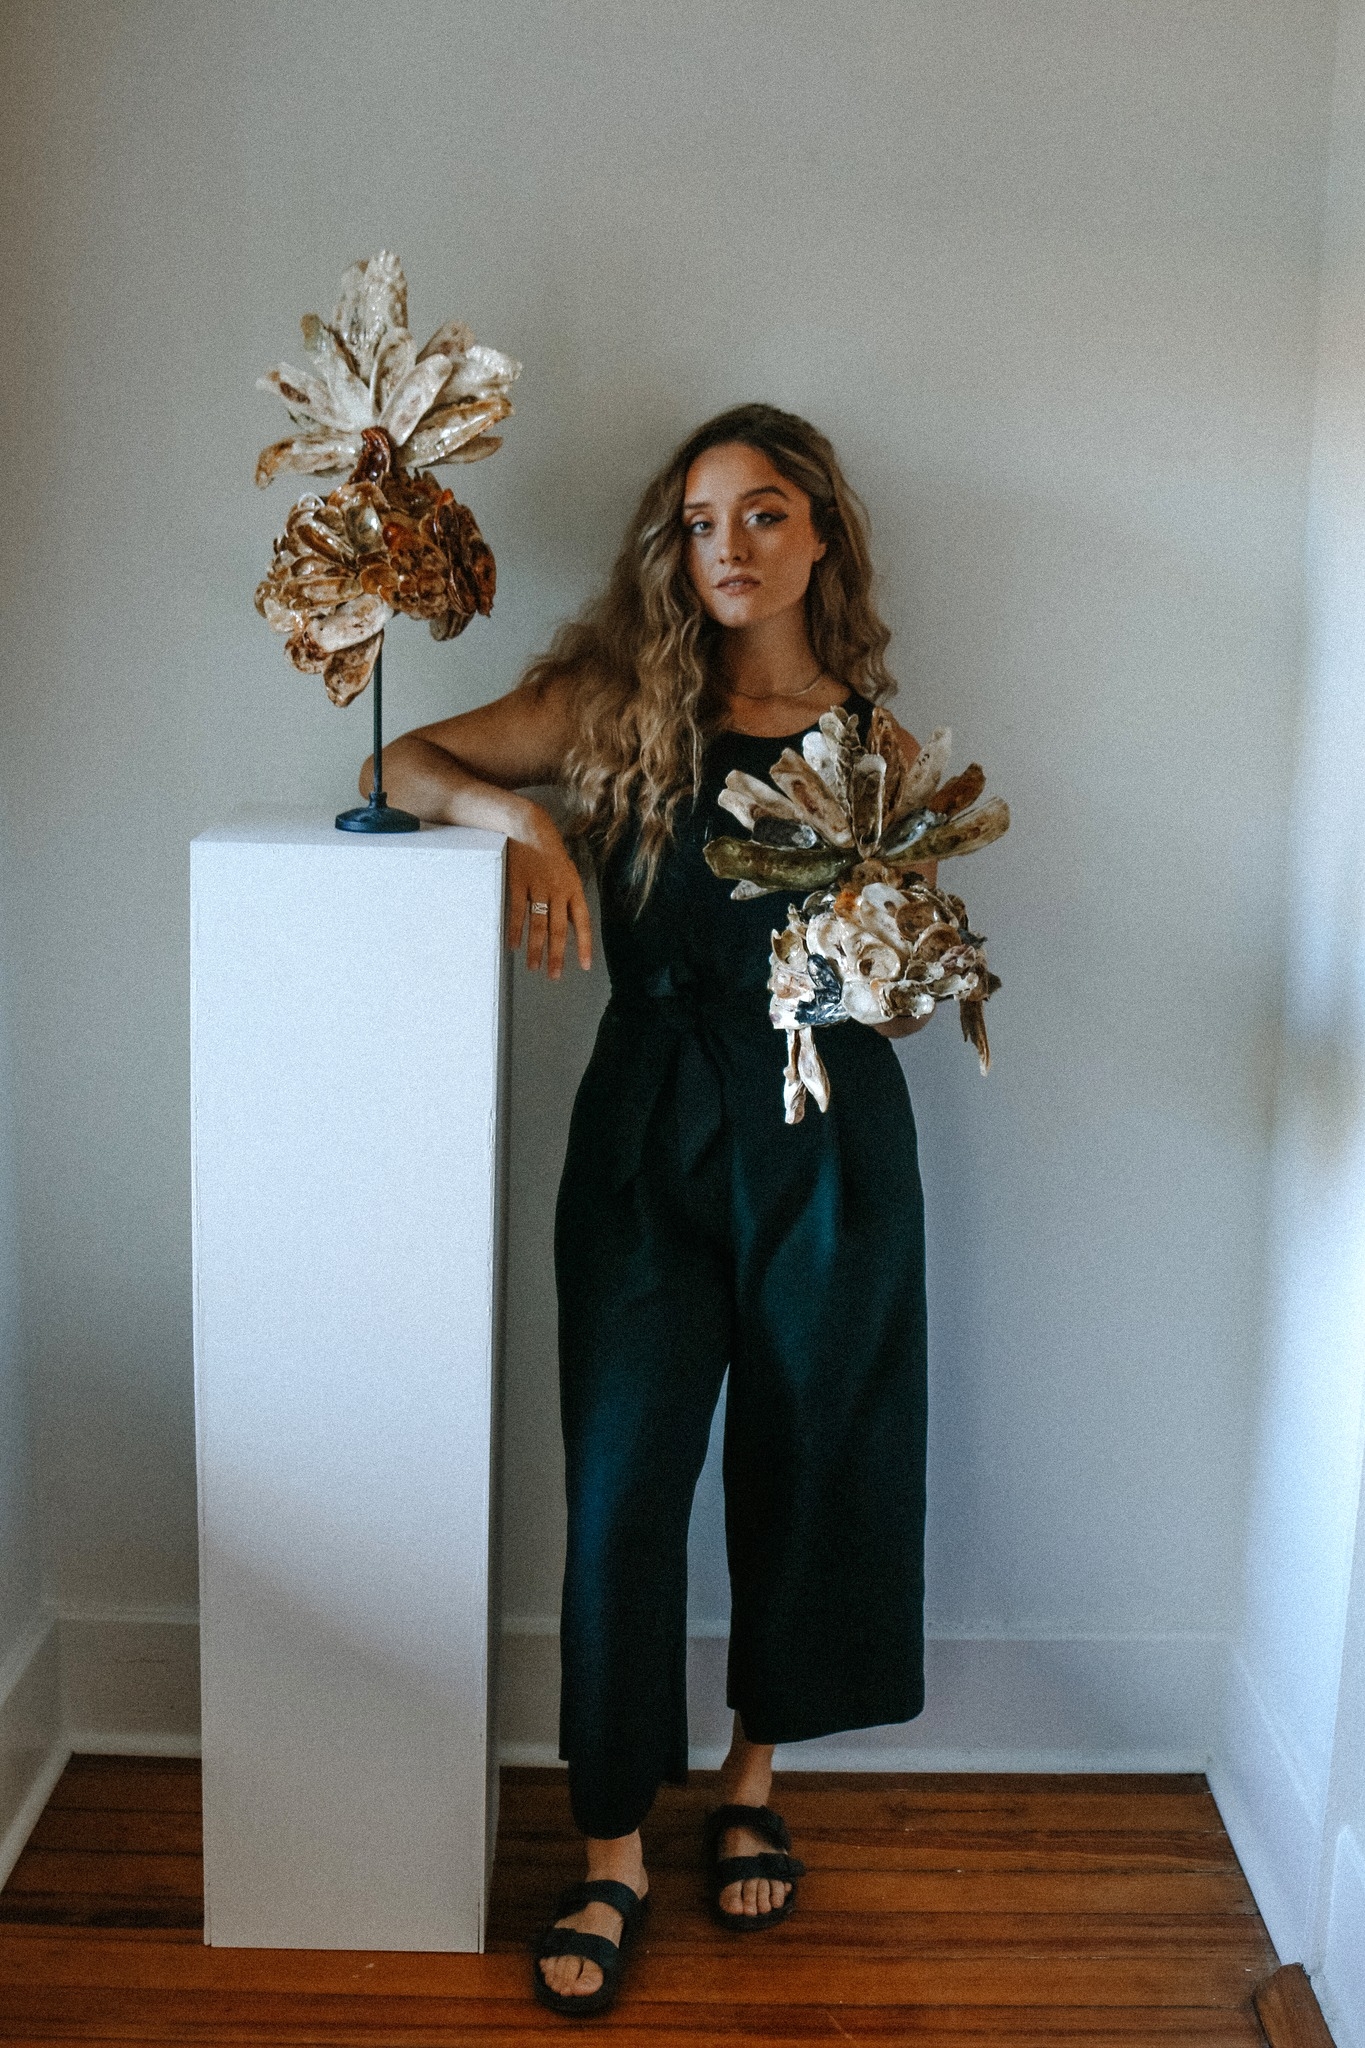 Stephanie Forbes standing next to her work "Divine Armour and the Lowcountry". Stephanie is wearing a black jumpsuit and sandals, she has long curly blonde hair and pale sin. She is standing with her two romanesque battle helmets, which are made of recycled oyster shells. All infront of a white wall.